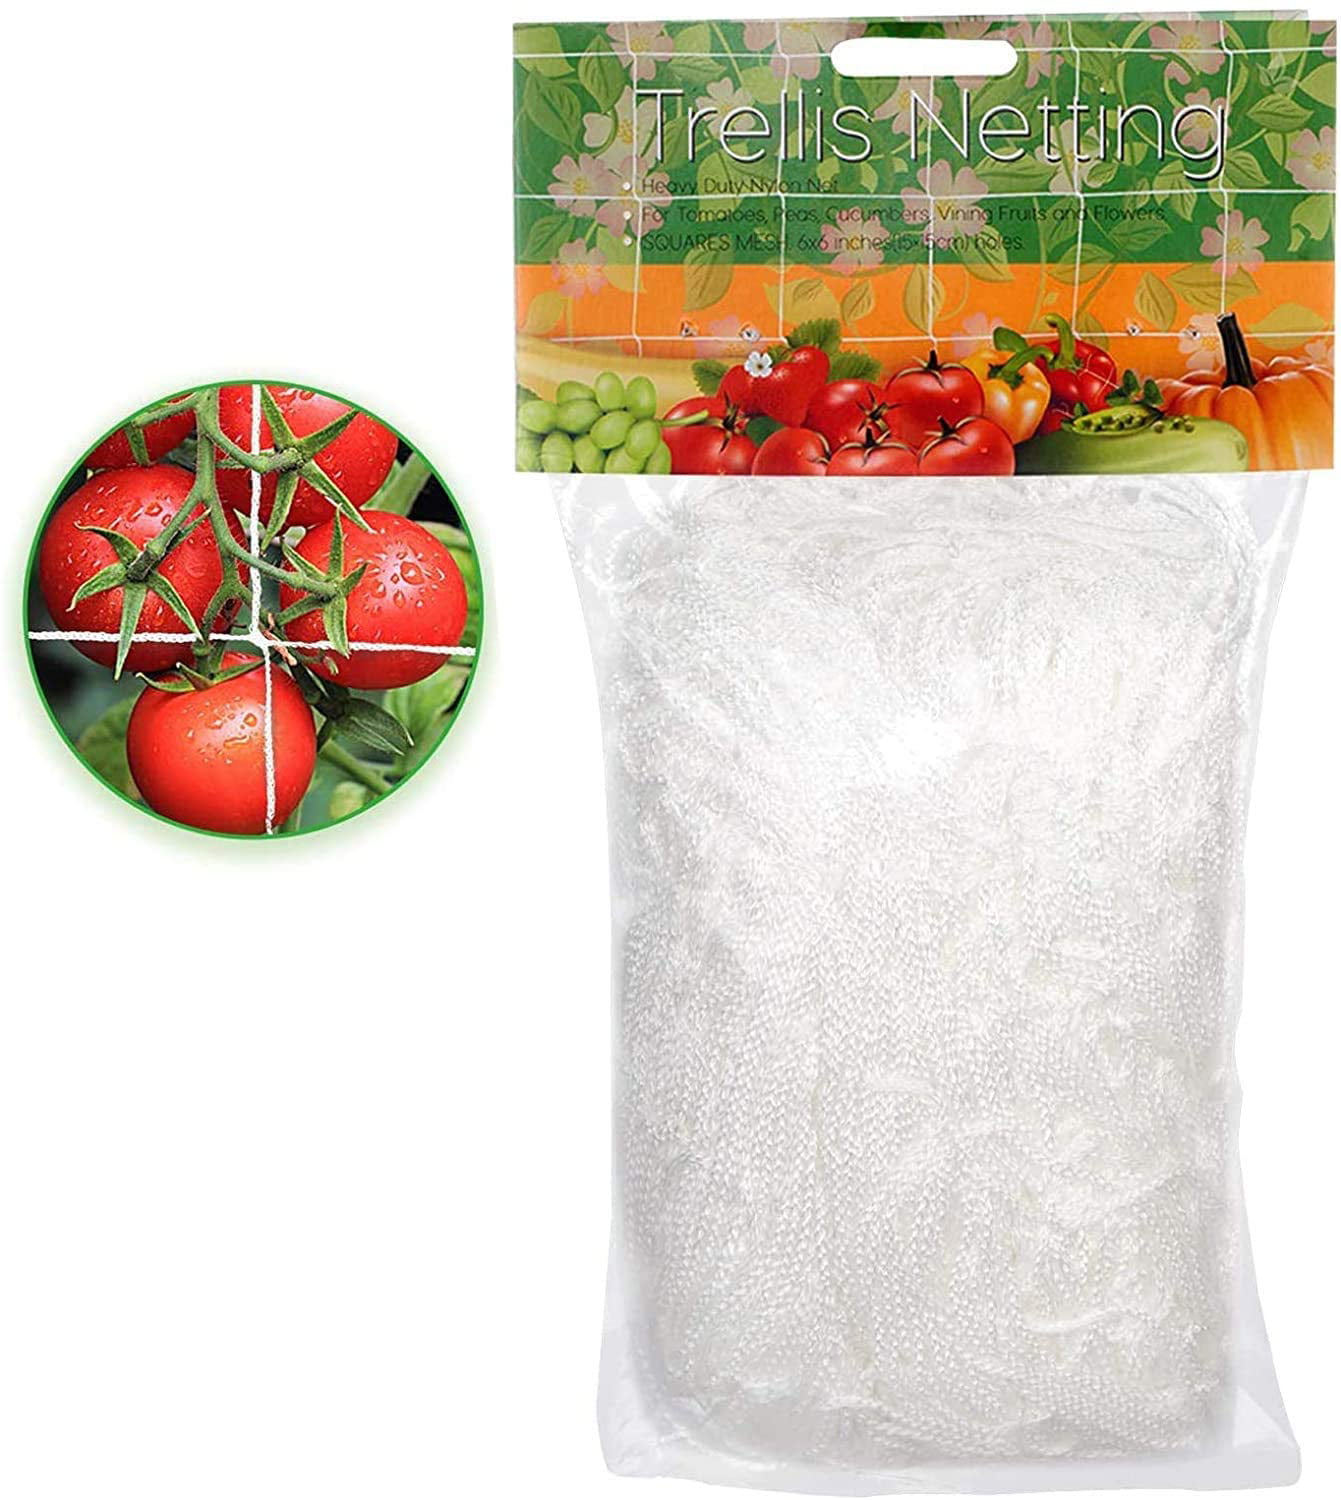 Heavy Duty & UV Stabilized Stop Bird without Harm 3m x 5m LUCKLAVER Soft Anti Butterfly Netting for Garden Vegetables and Fruit Protection